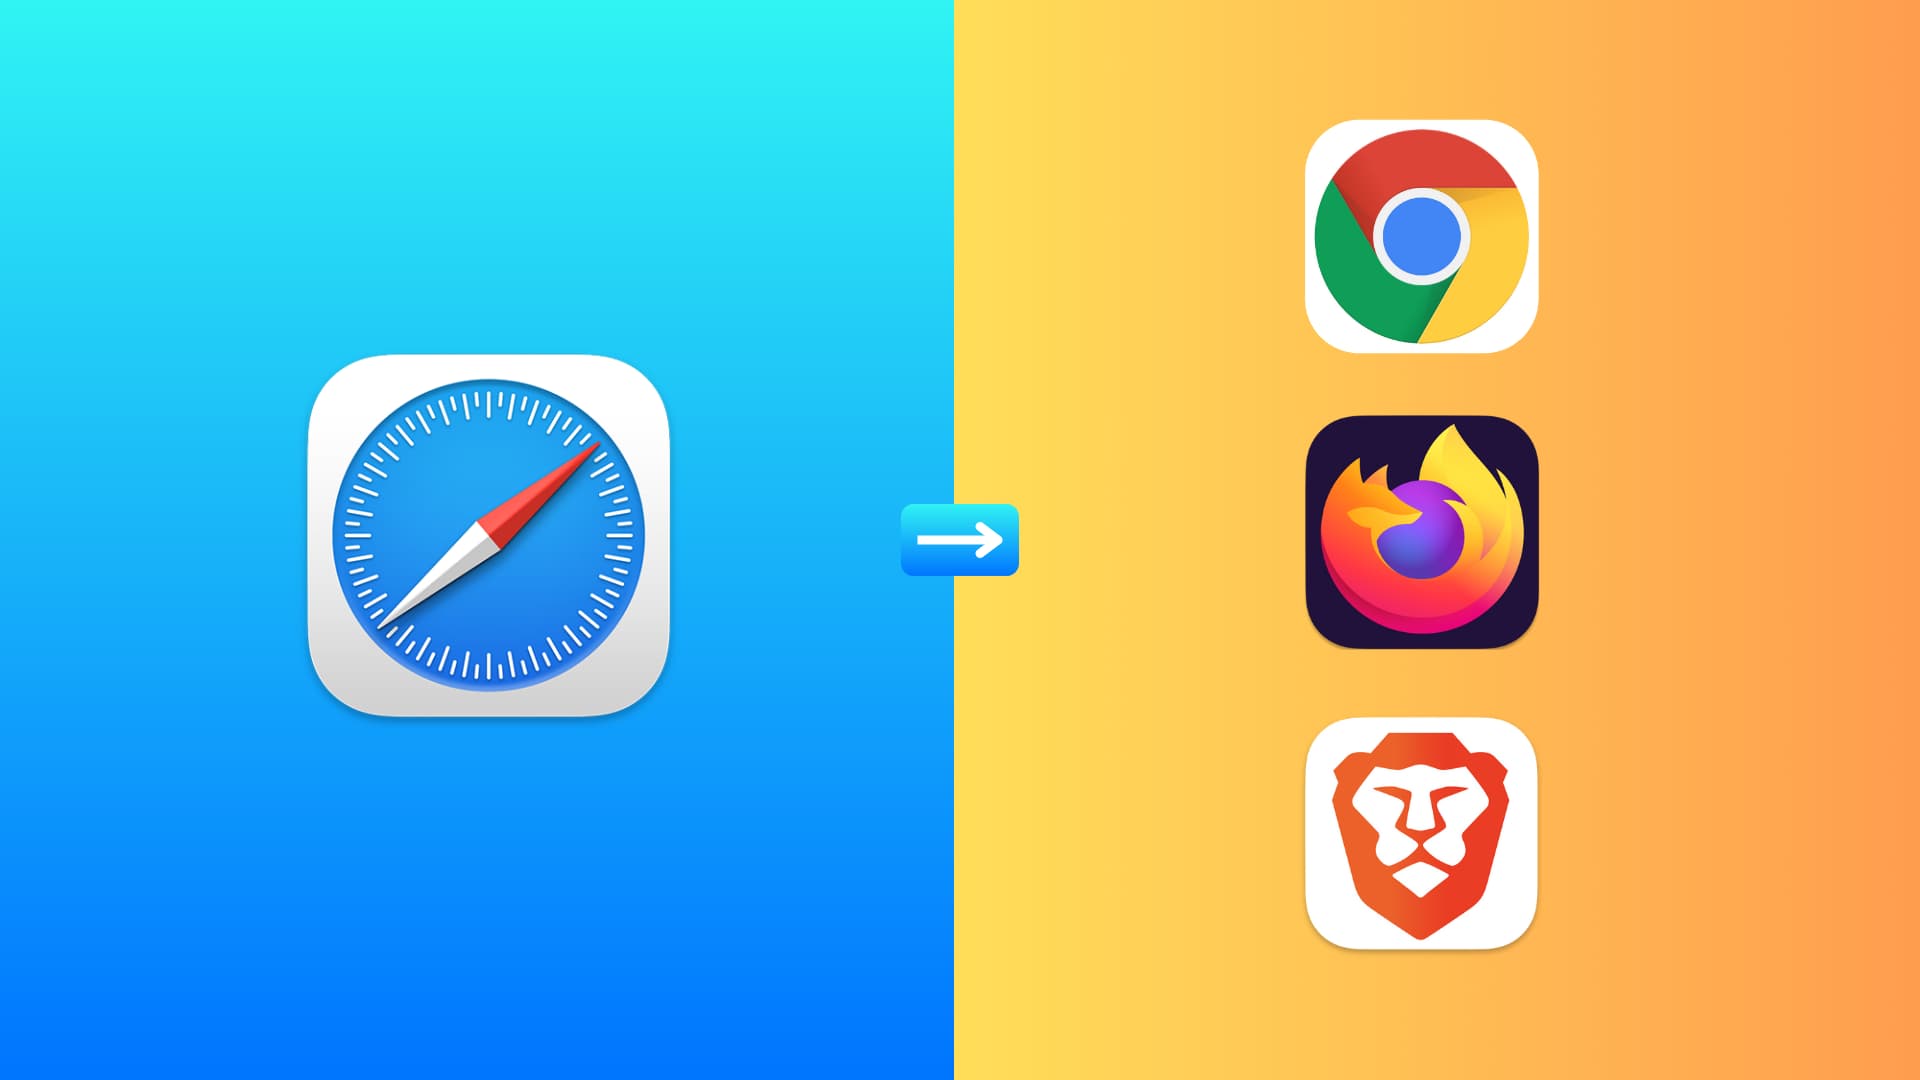 Image illustration showing a move from Safari to Chrome, Firefox, and Brave browsers